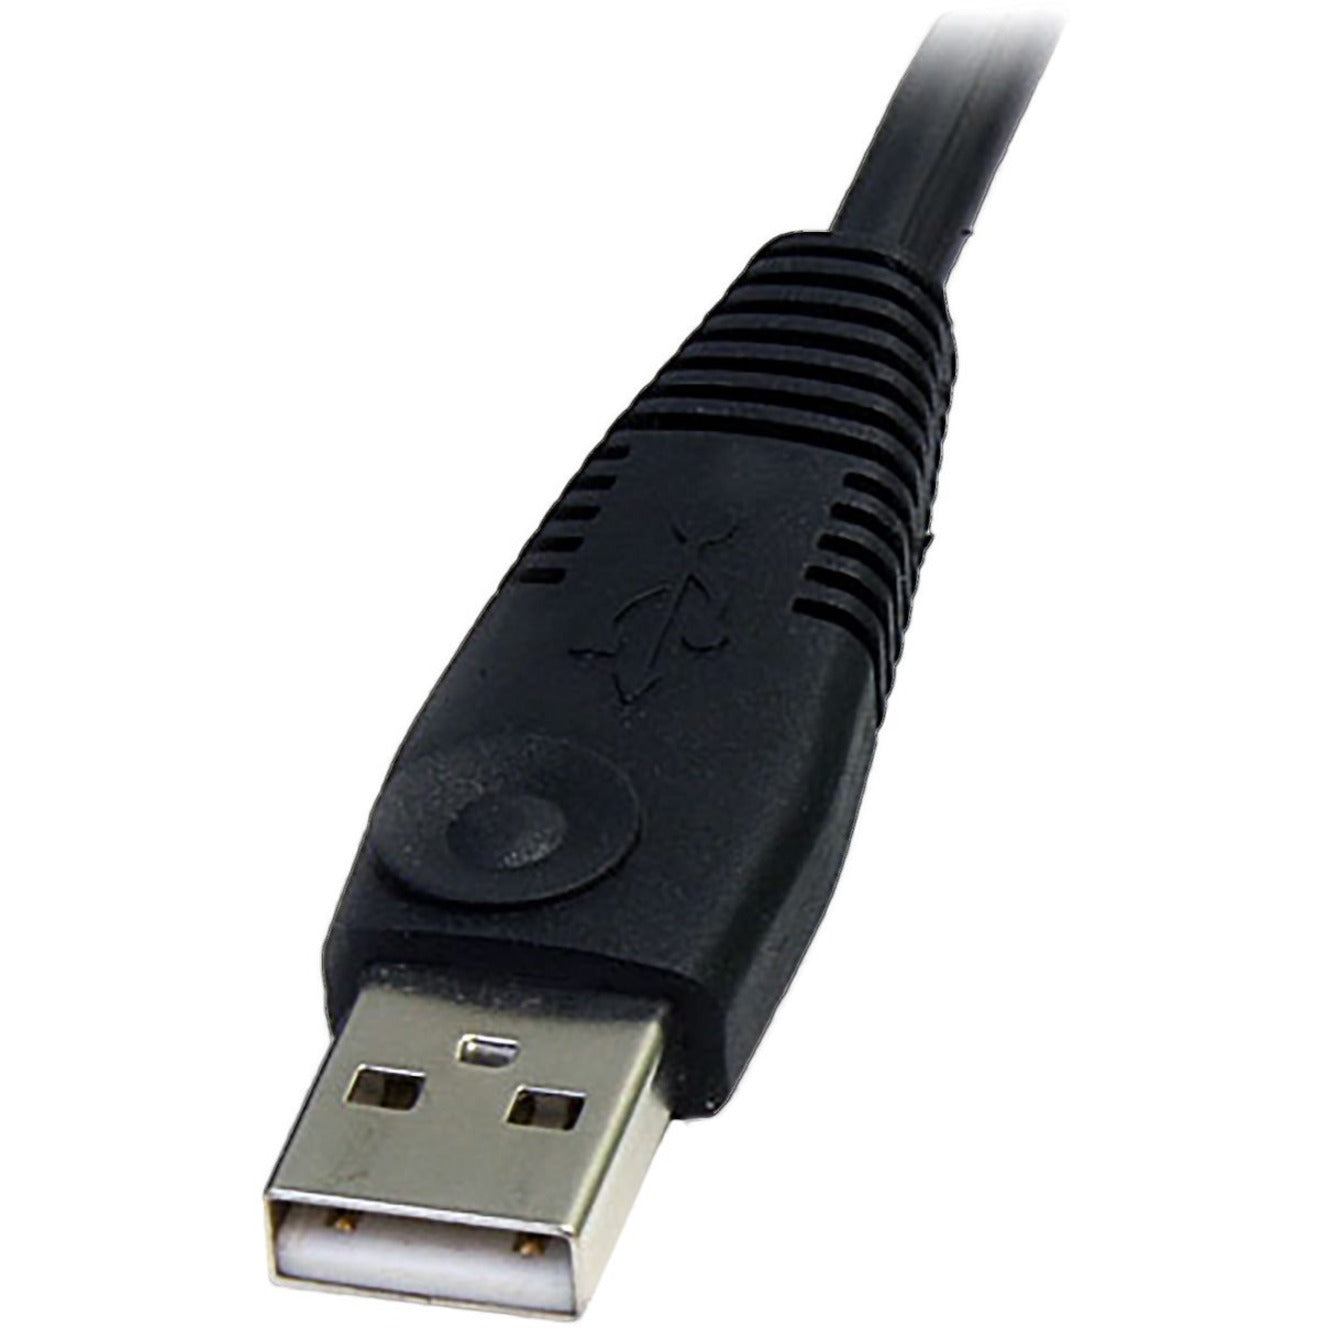 StarTech.com DP4N1USB6 6 ft 4-in-1 USB DisplayPort KVM Switch Cable, Molded, Strain Relief, Gold Plated Connectors